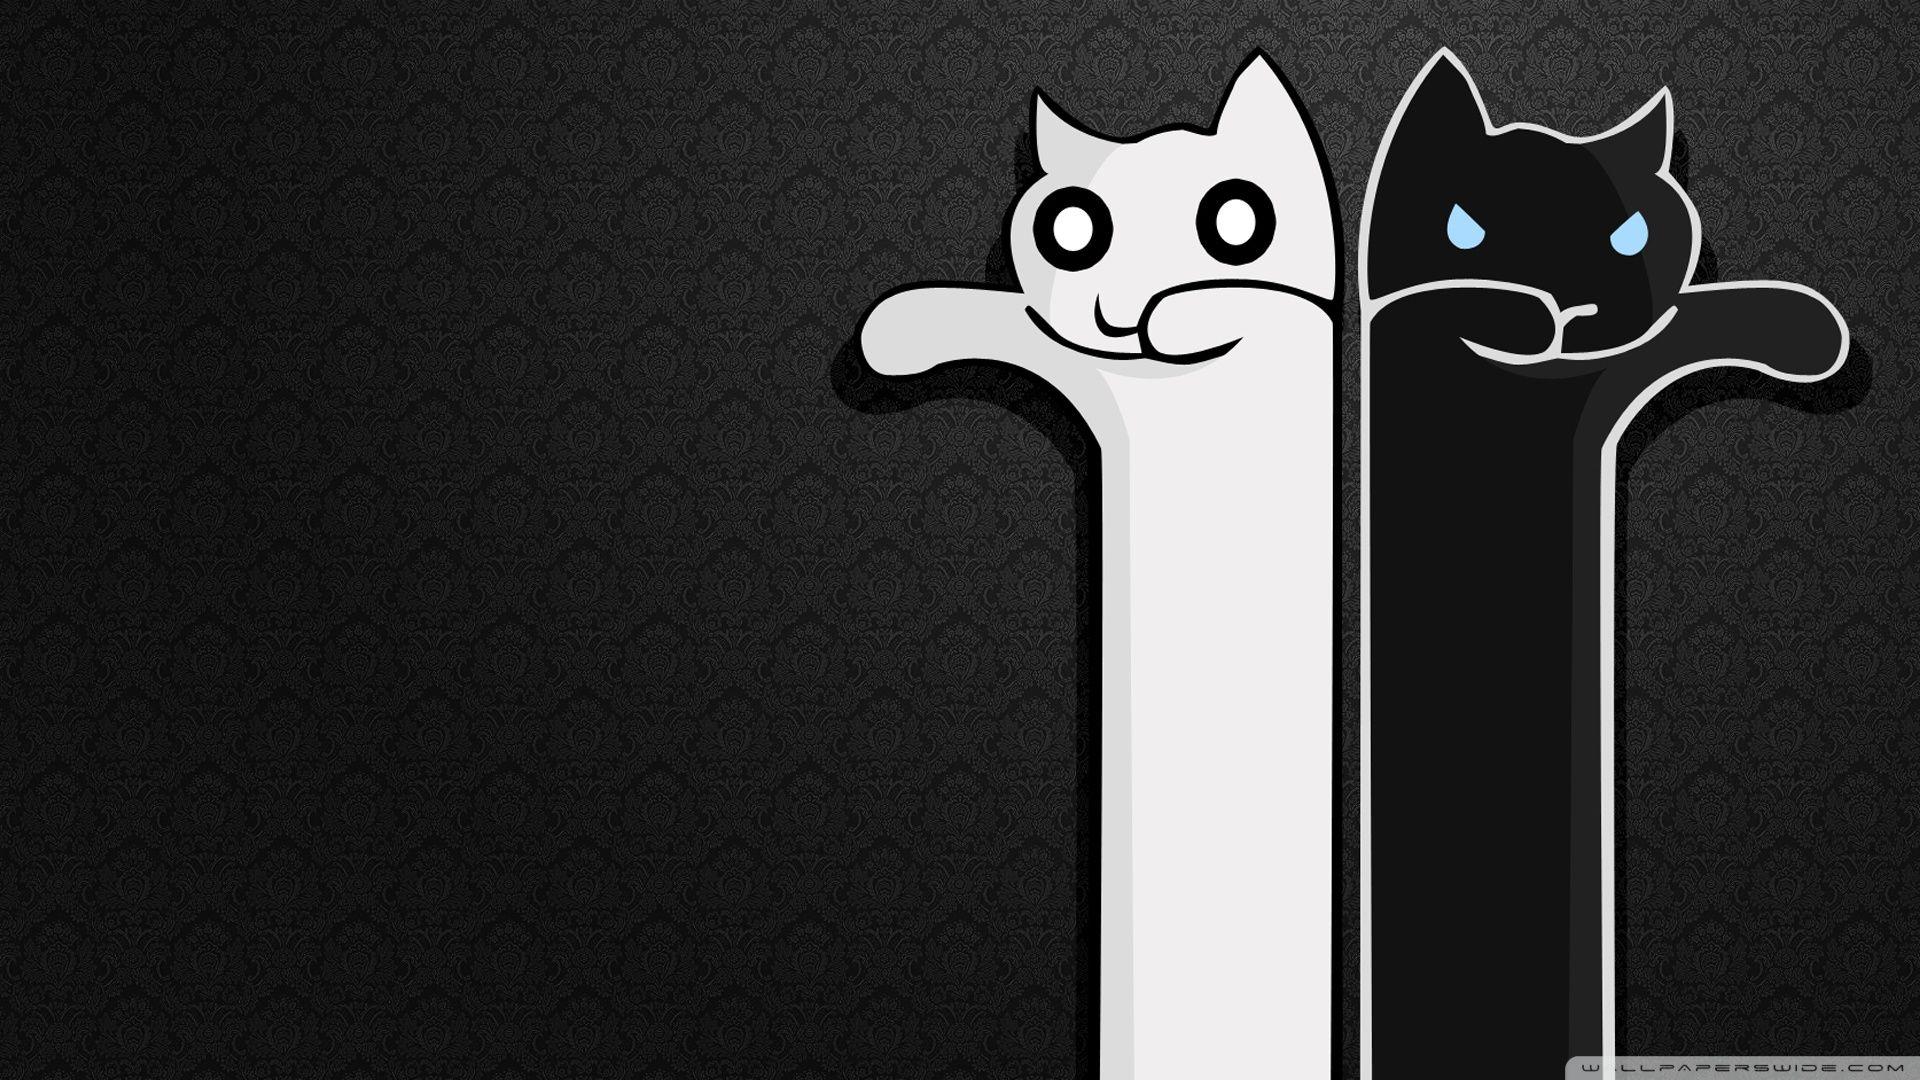 Zombie Cats. VIP Wallpaper. HD Wallpaper for Desktop and Mobile